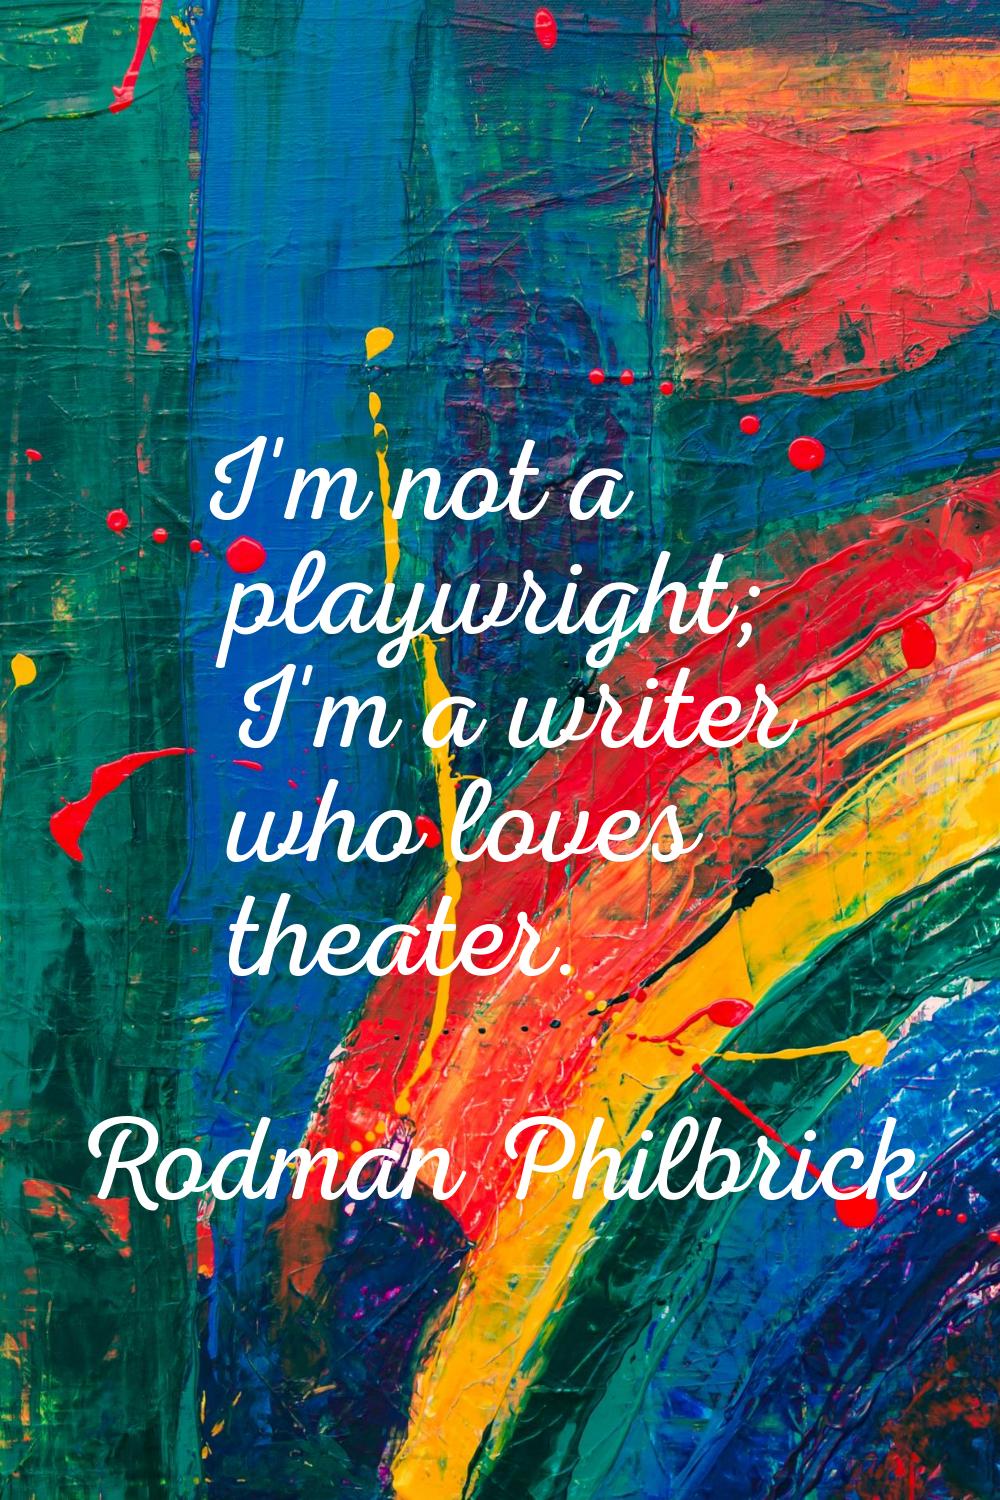 I'm not a playwright; I'm a writer who loves theater.